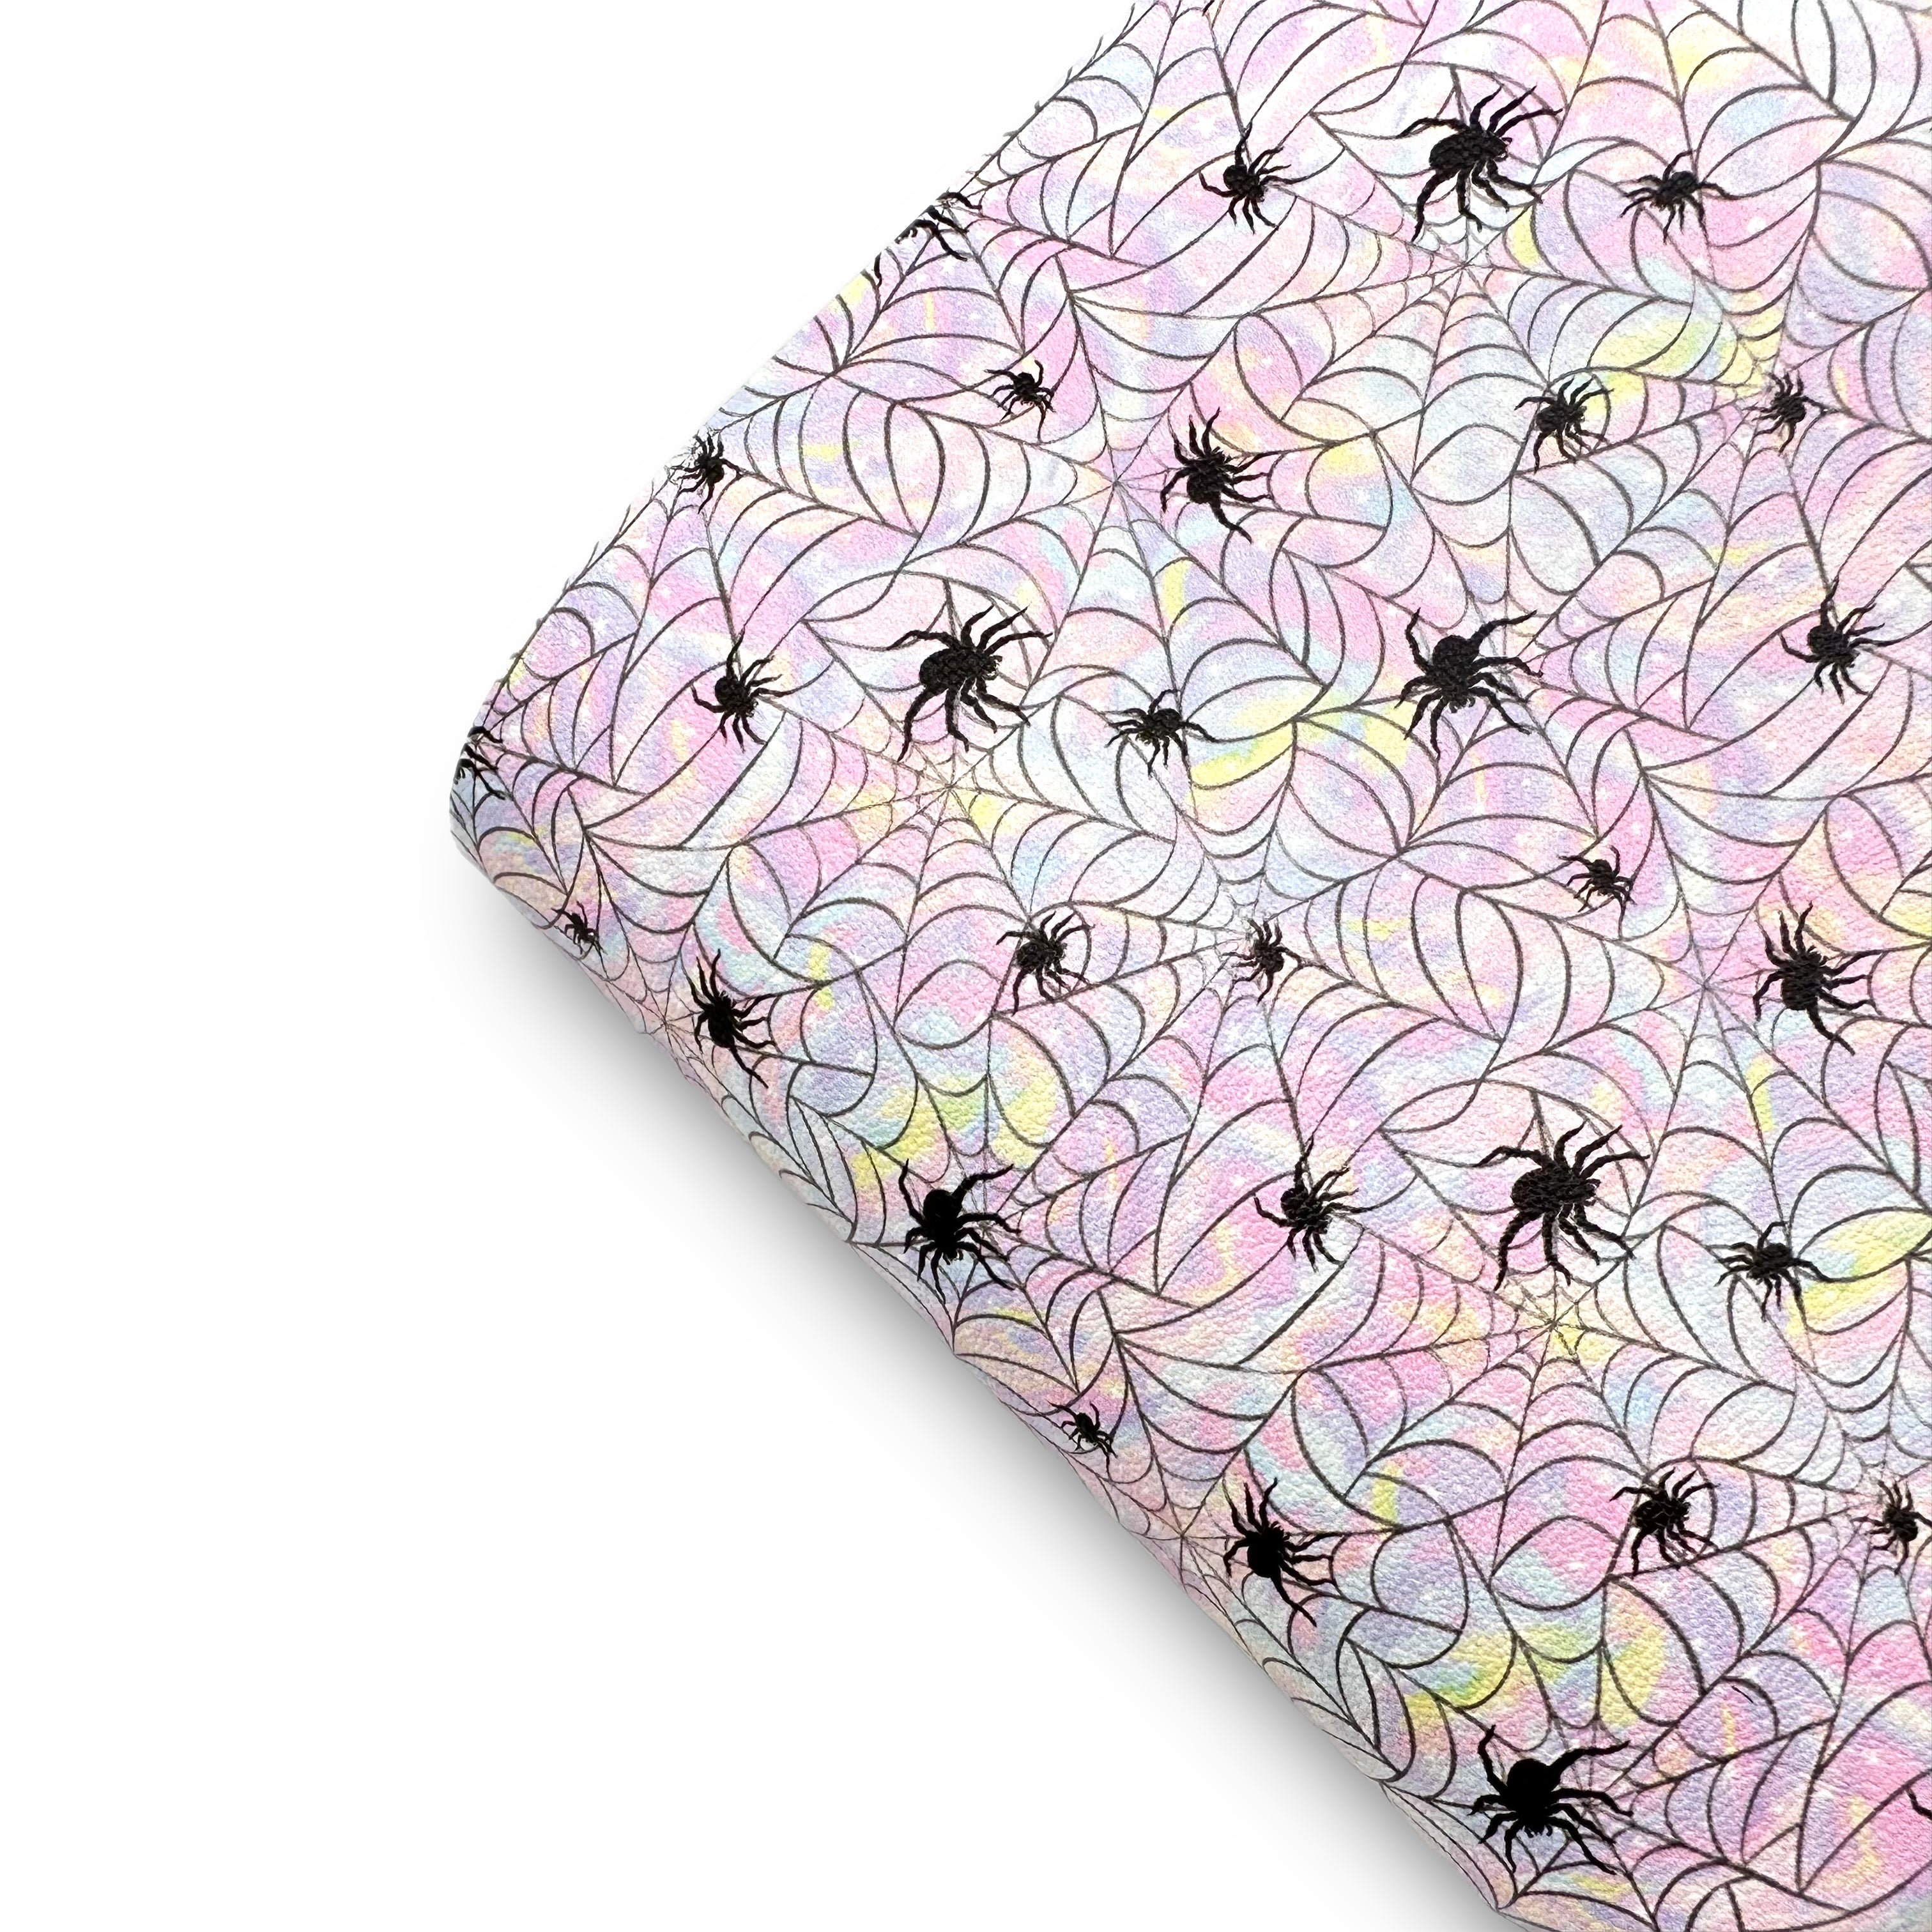 Pastel Galaxy Spider Webs Premium Faux Leather Fabric Sheets